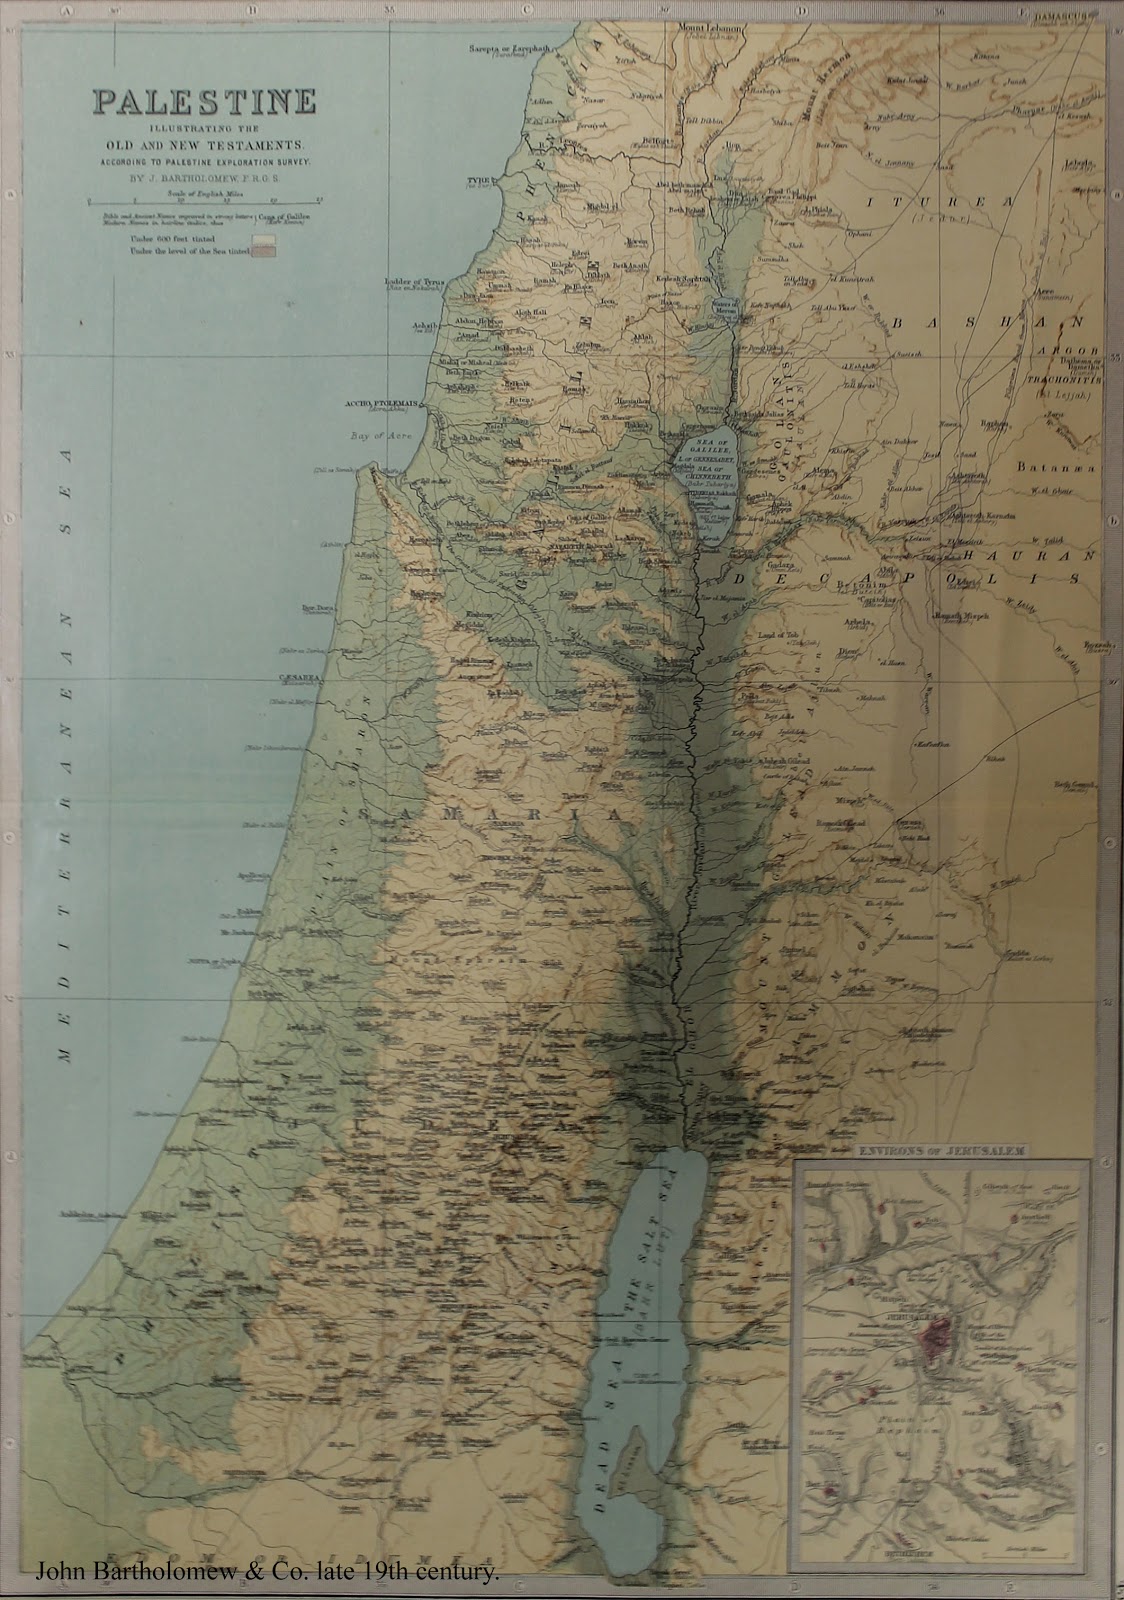 Late 19th-century map of Palestine